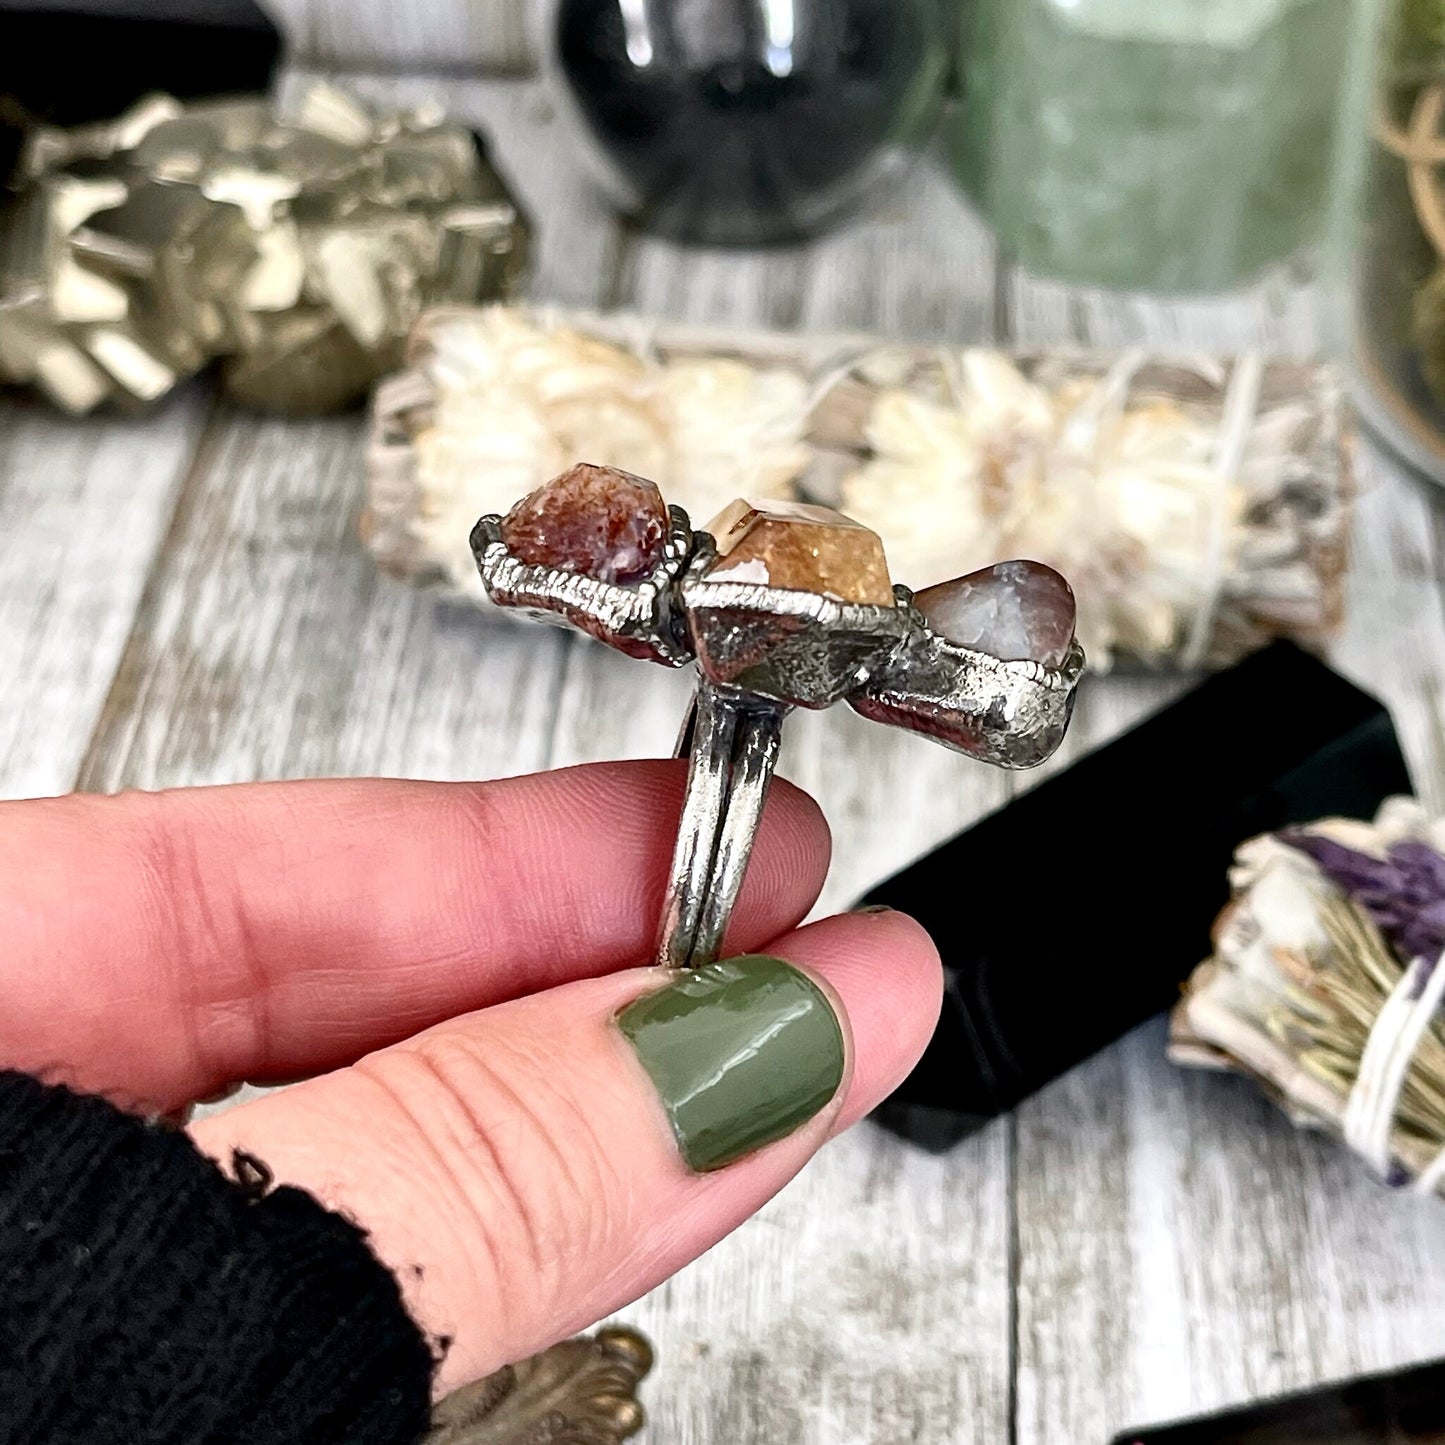 Size 8.5 Crystal Ring - Three Stone Citrine Ring in Sliver / Foxlark Collection - One of a Kind / Big Crystal Jewel // Alternative Boho Ring